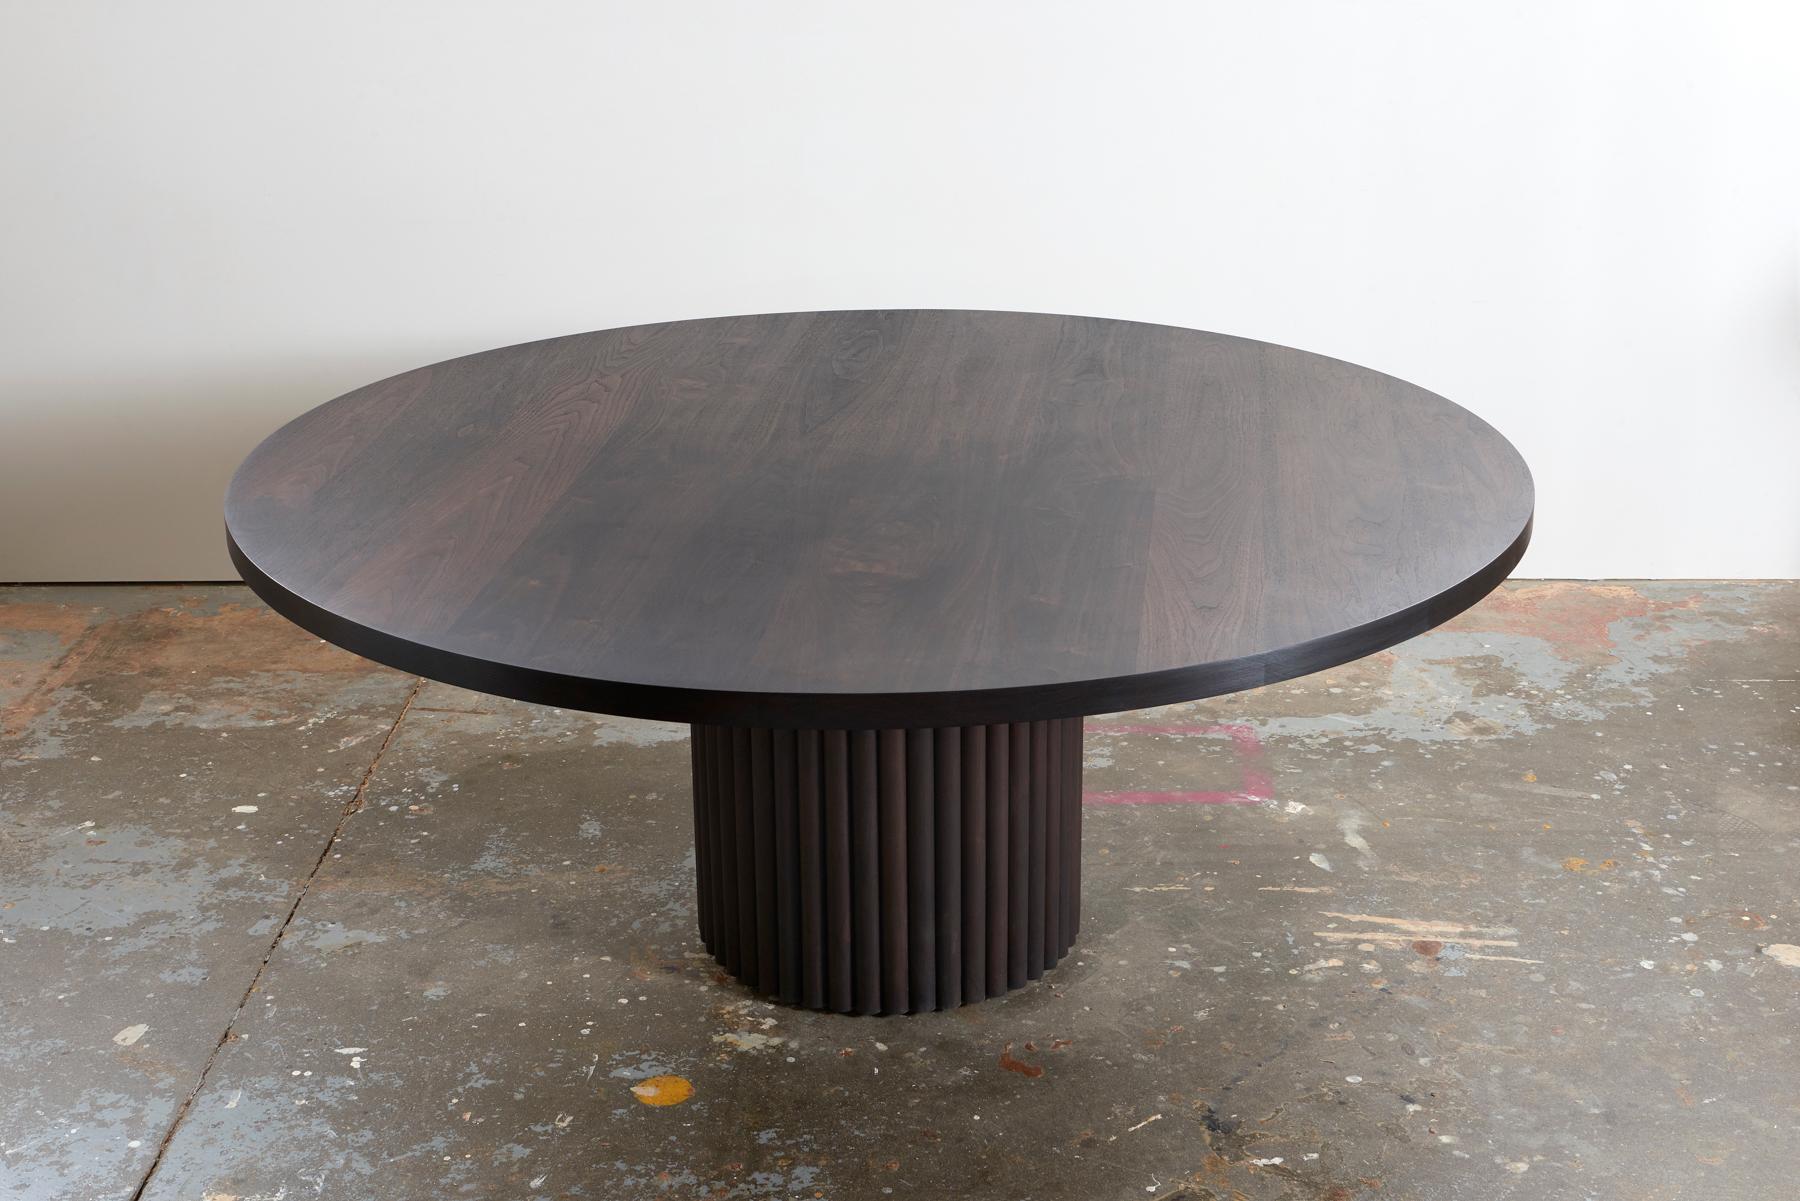 Unapologetically bold, Kate Duncan's Dining Table is a statement piece that pays homage to both a contemporary aesthetic as well as brutalist architecture. A large column of coopered splines and a hefty solid wood top create a table you just can’t